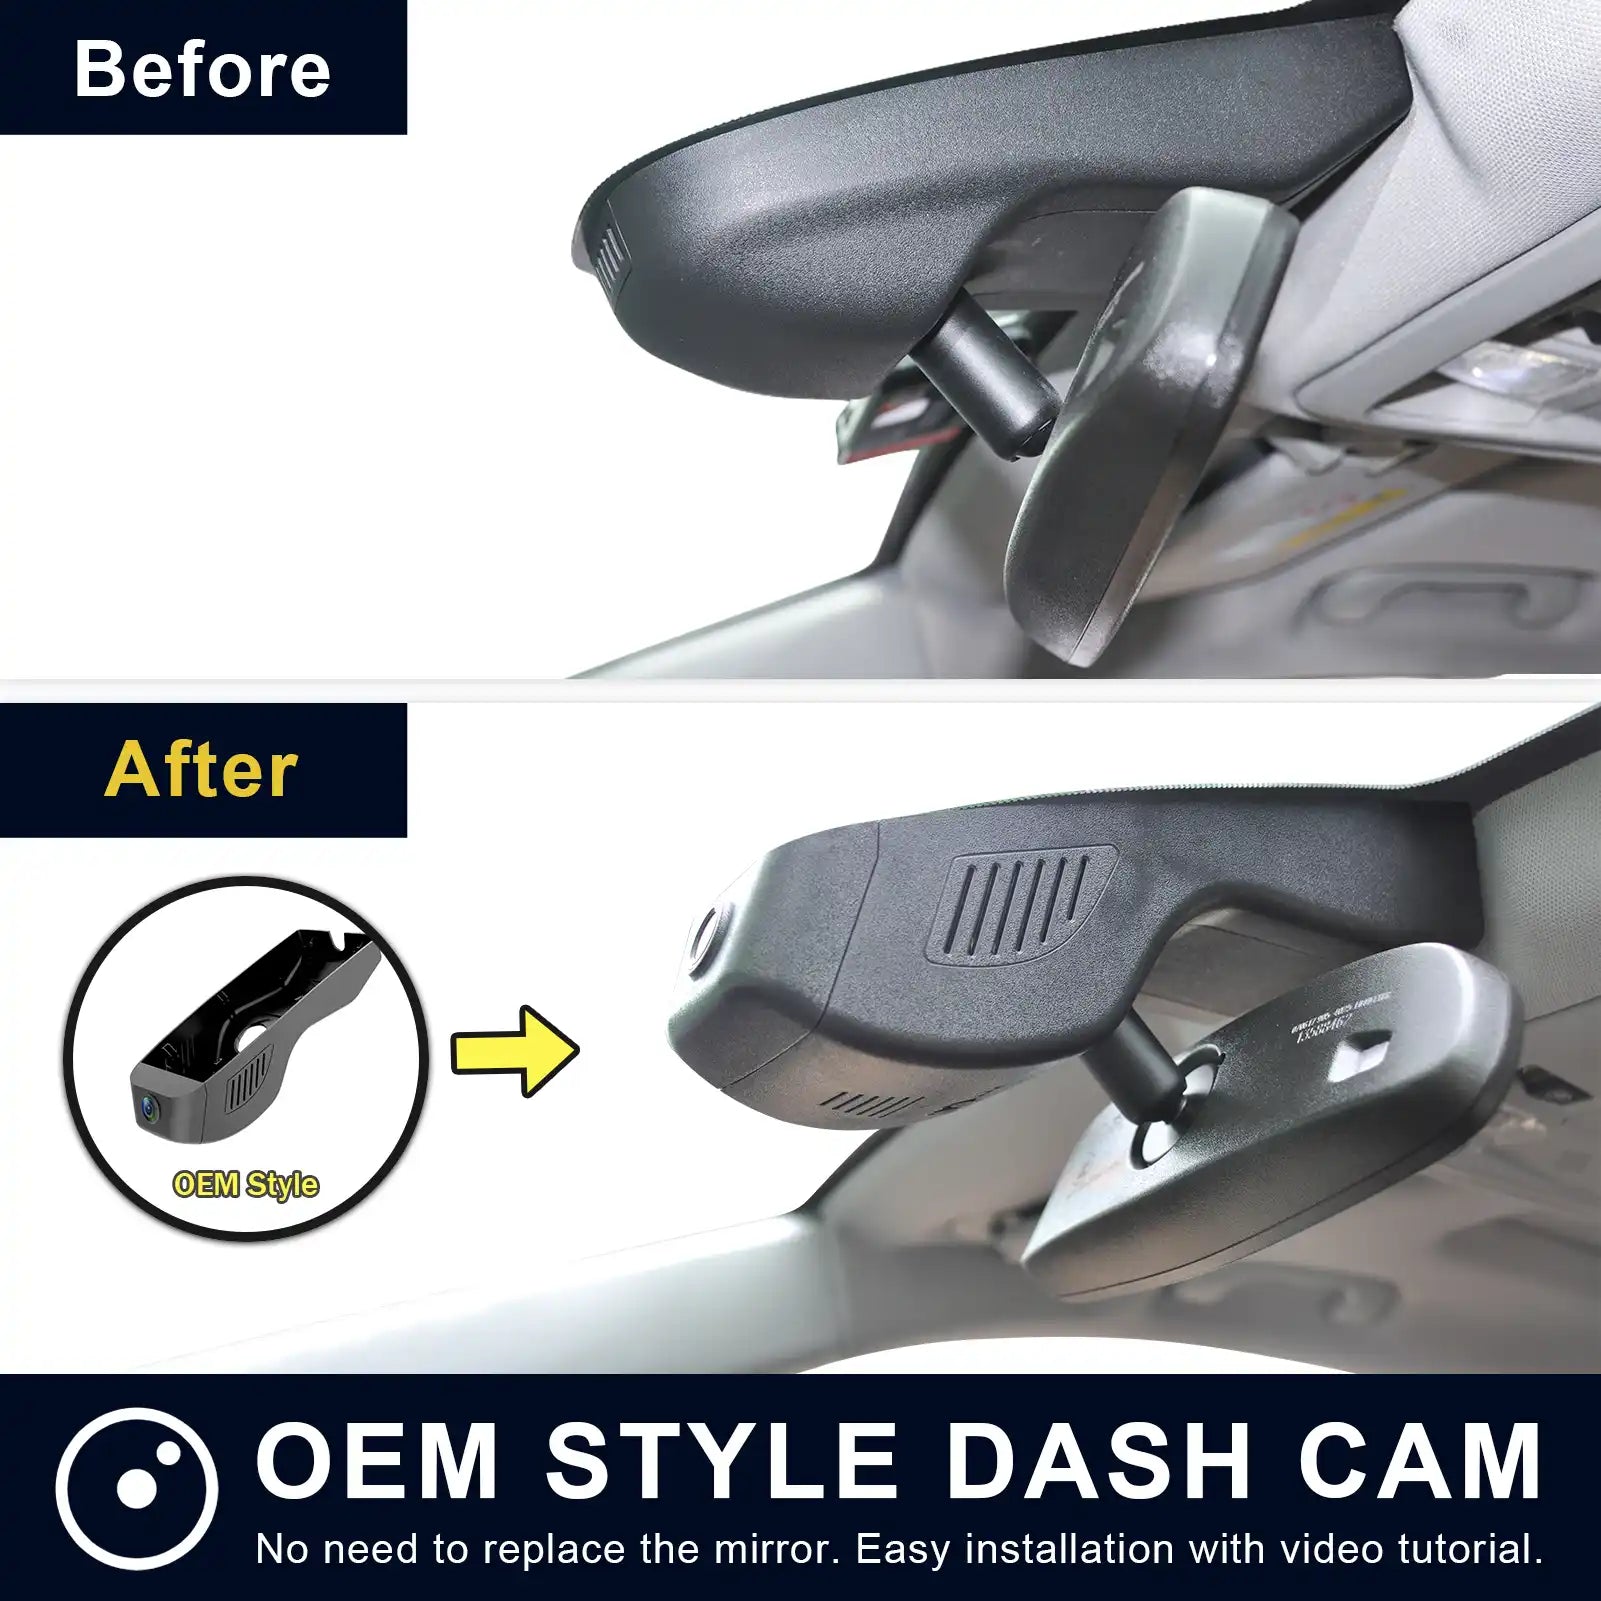 GMC Terrain dash cam before and after installation view 